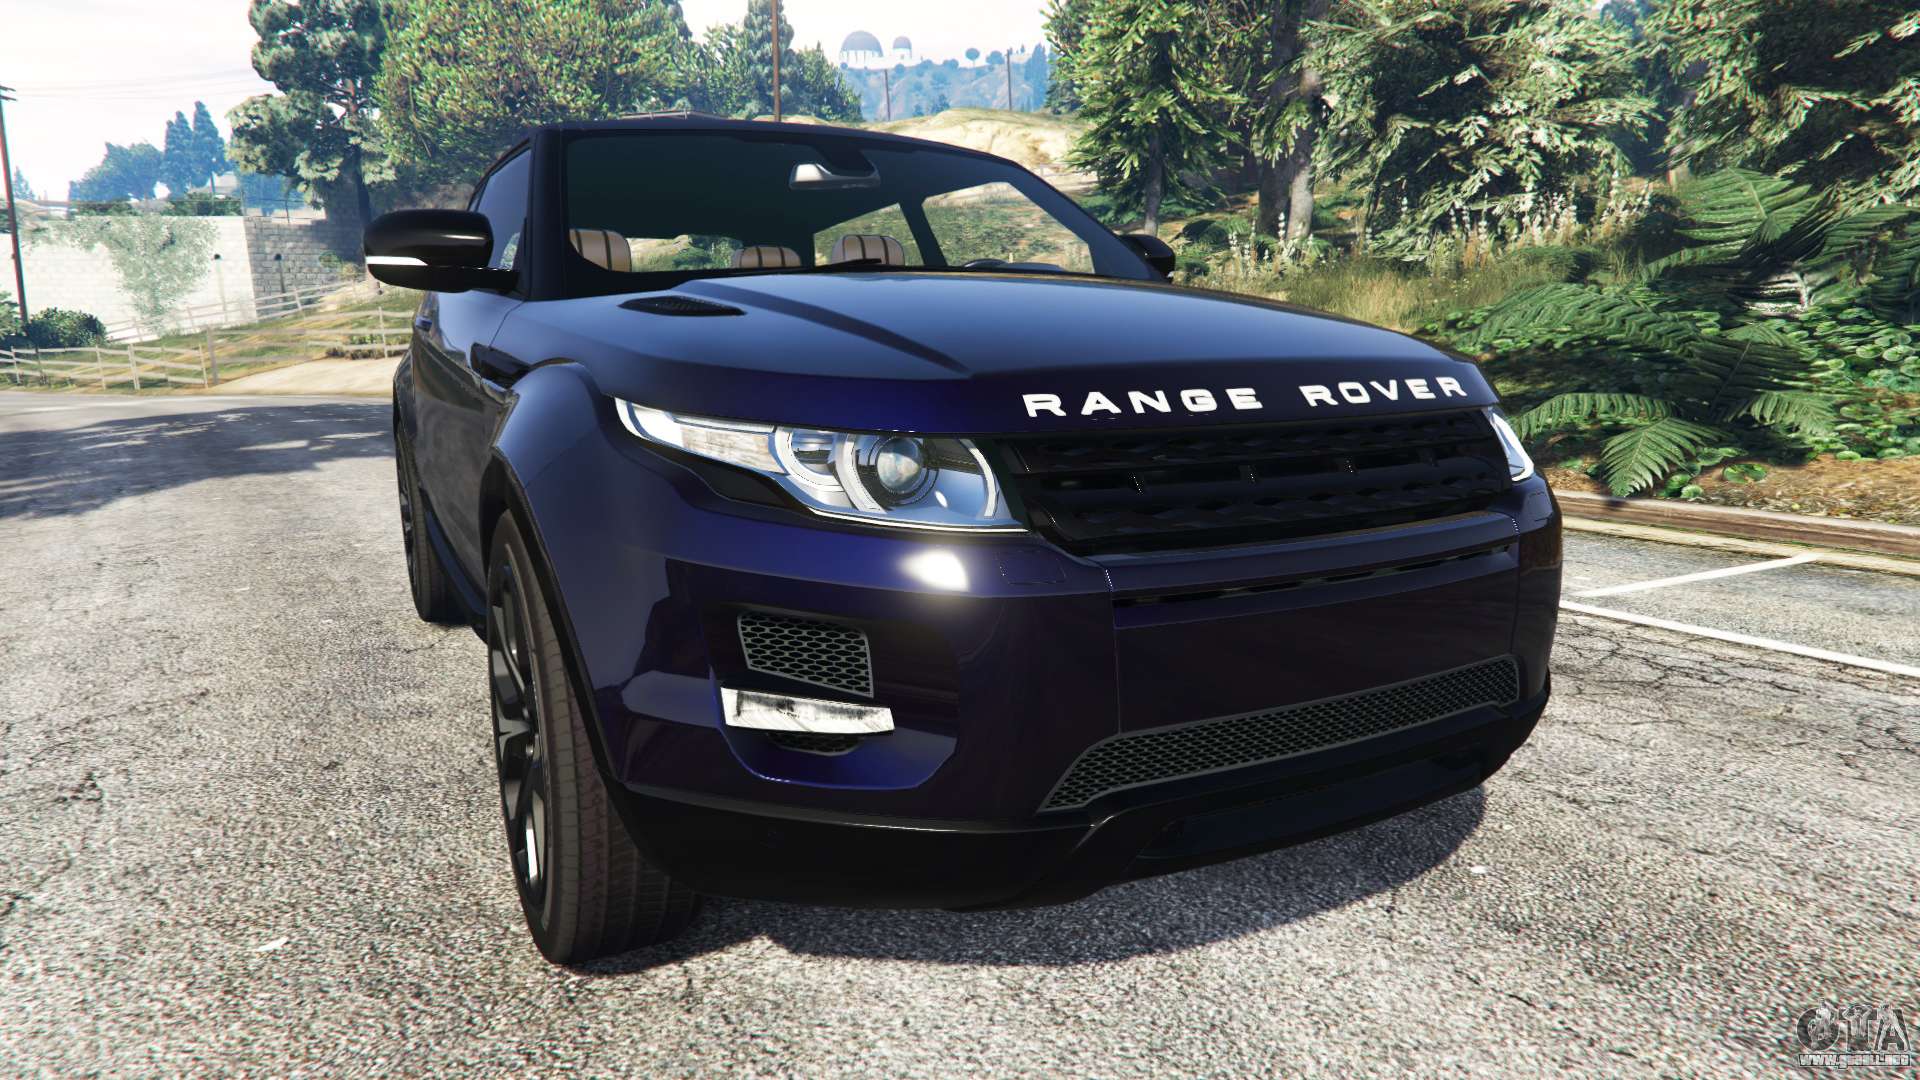 Land rover in gta 5 фото 74